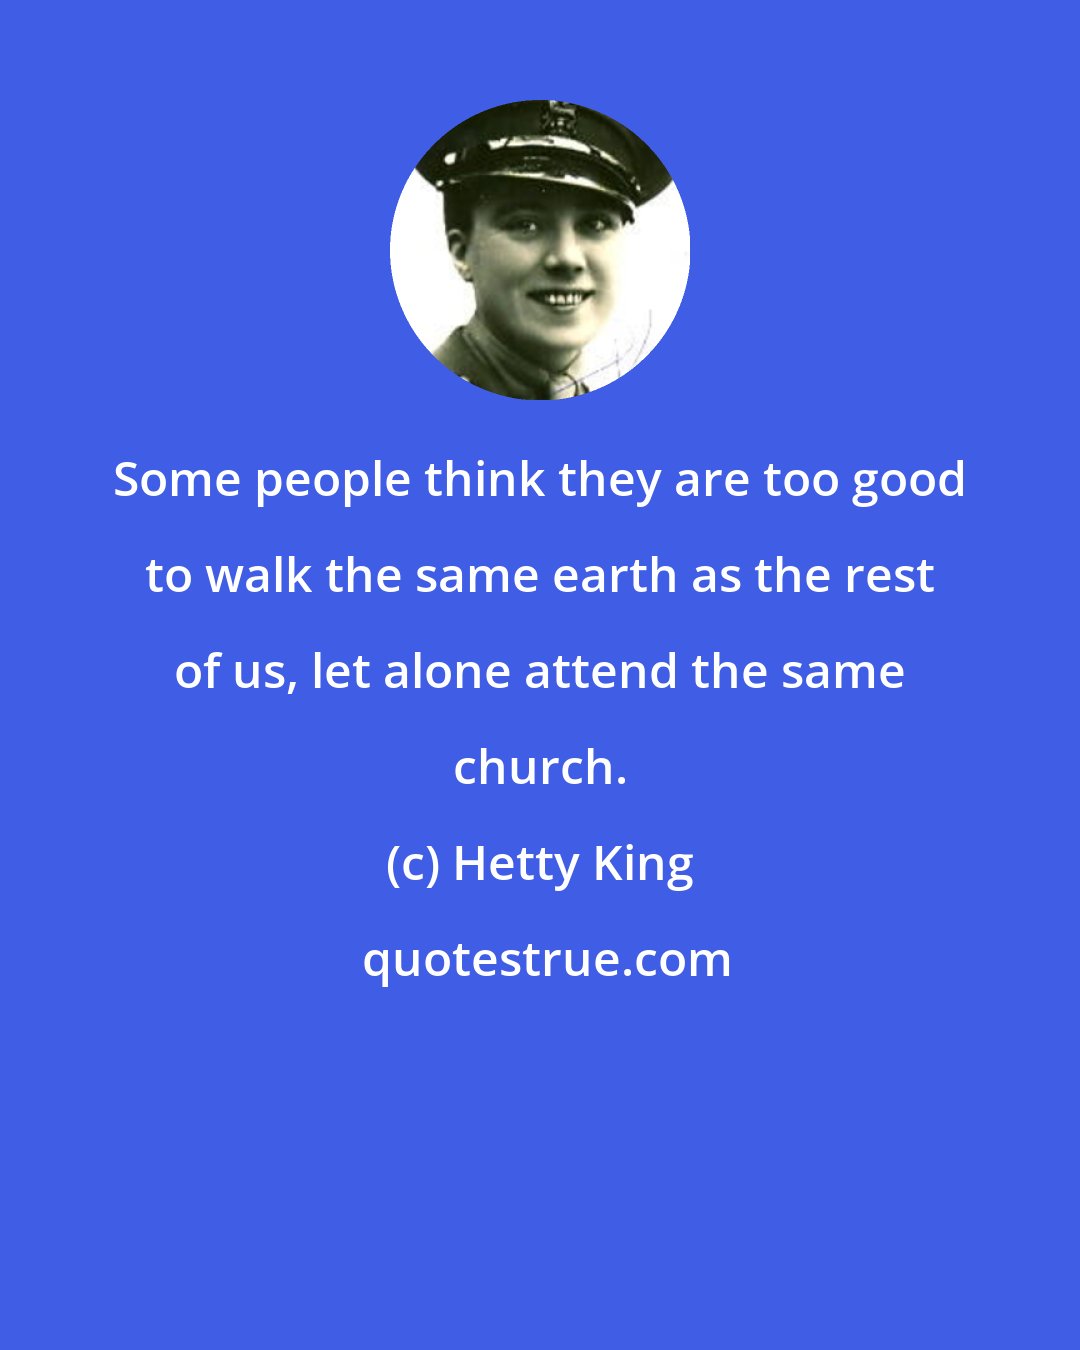 Hetty King: Some people think they are too good to walk the same earth as the rest of us, let alone attend the same church.